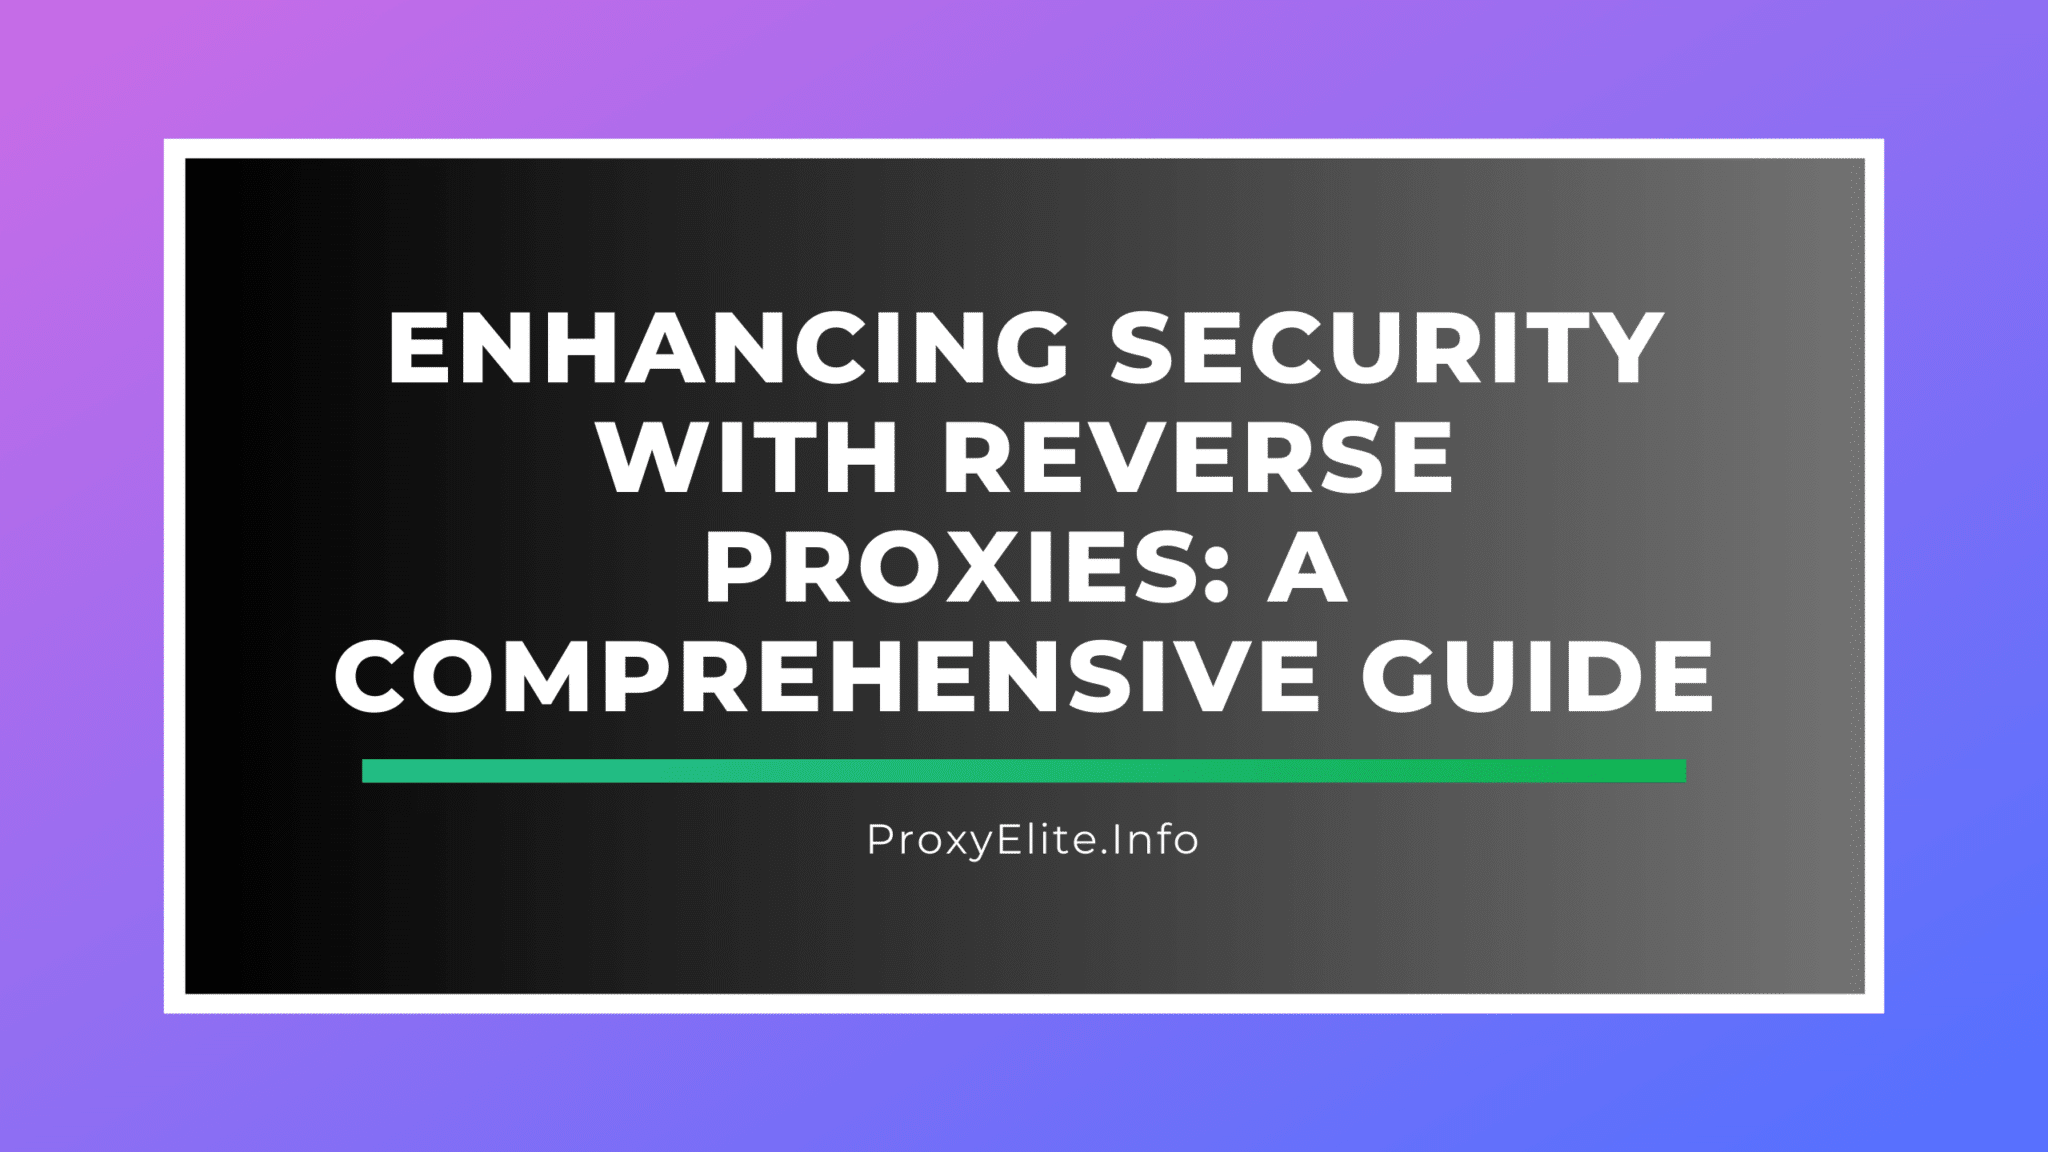 Enhancing Security with Reverse Proxies: A Comprehensive Guide